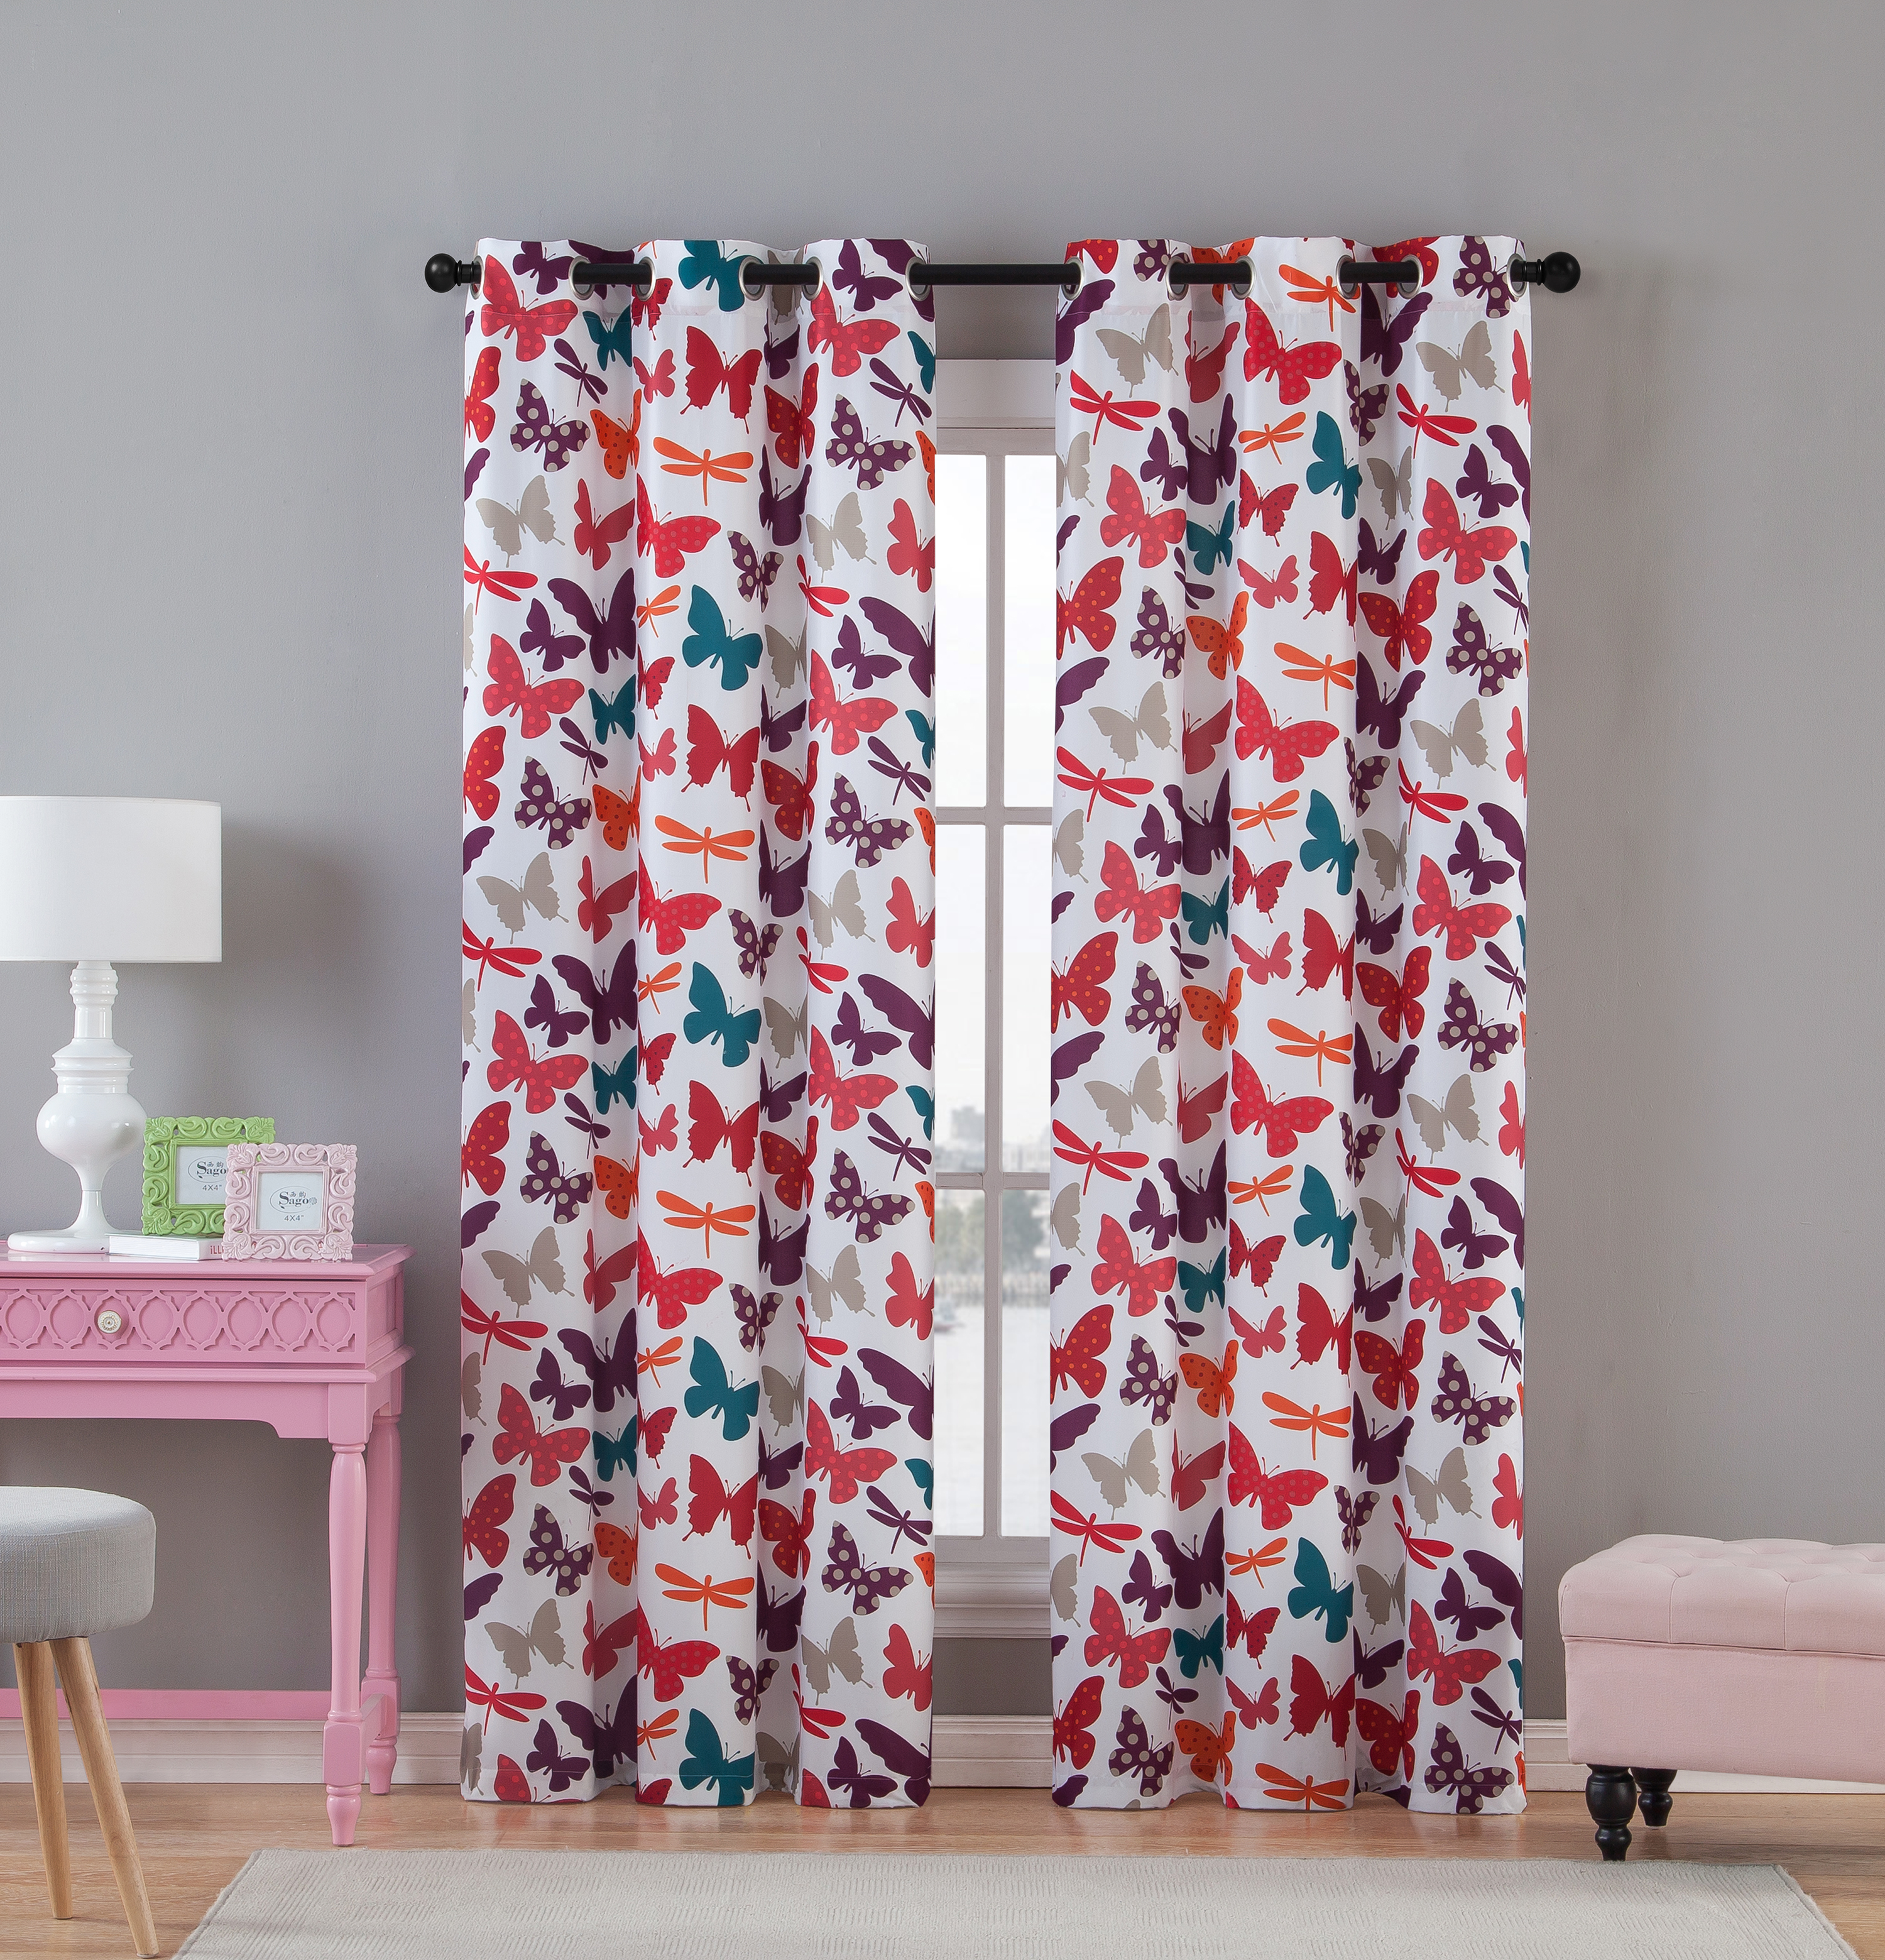 Butterfly Printed Grommet Window Curtain Panels - 2 piece